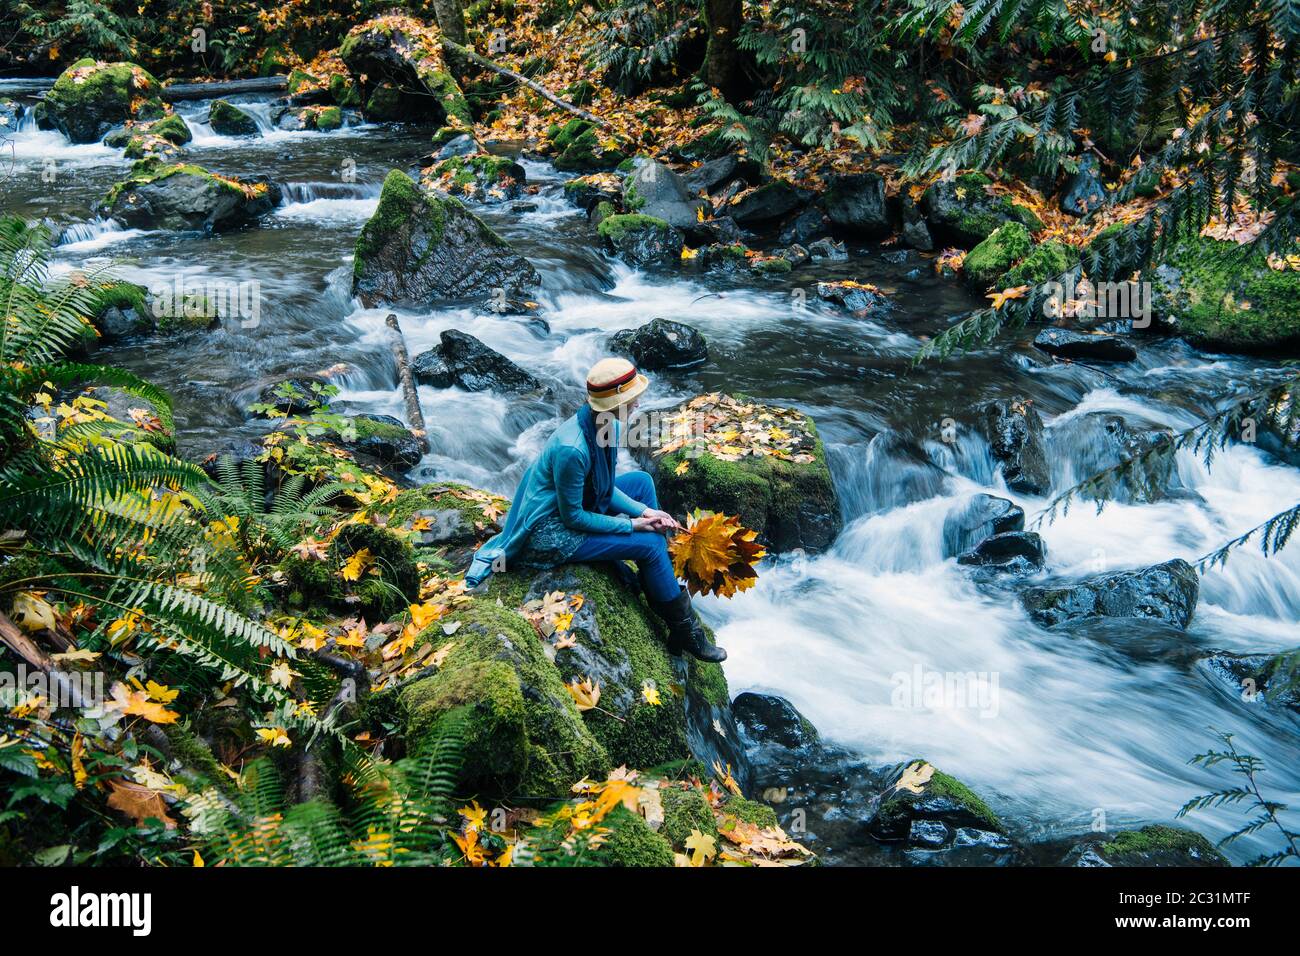 View of woman on rock with bouquet of fall leaves, Rocky Brook Falls, Brinnon, Washington, USA Stock Photo